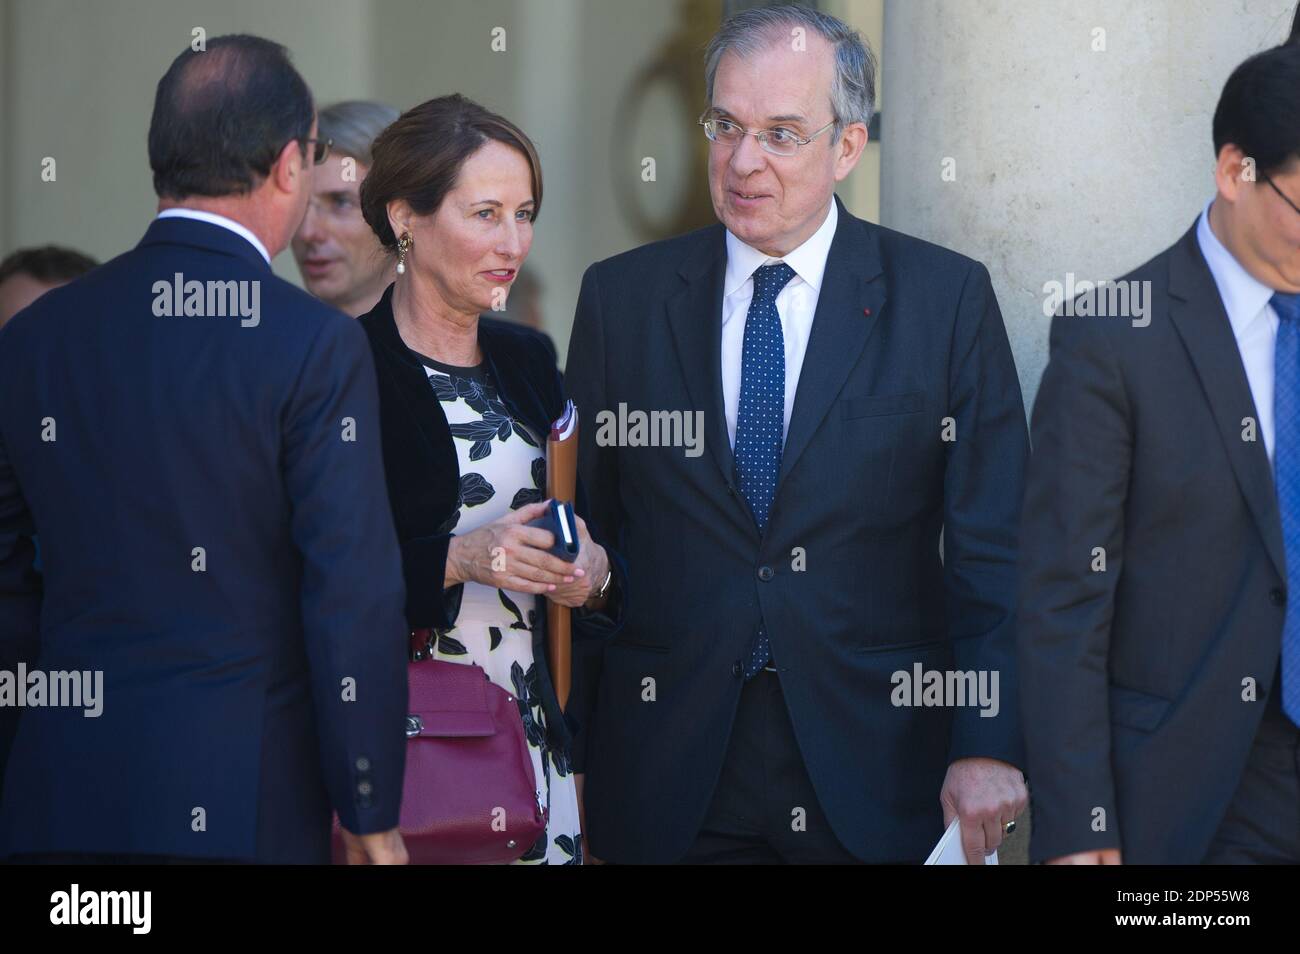 French President Francois Hollande along with Minister of Ecology, Sustainable Development and Energy Segolene Royal and France's ambassador to China Maurice Gourdault-Montagne after a meeting and a lunch at the Elysee Palace, in Paris, France on June 30, 2015. Li Keqiang begins a three-day visit to France expected to be dominated by climate talks and the sealing of dozens of economic agreements between both nations. Photo by Thierry Orban/ABACAPRESS.COM Stock Photo